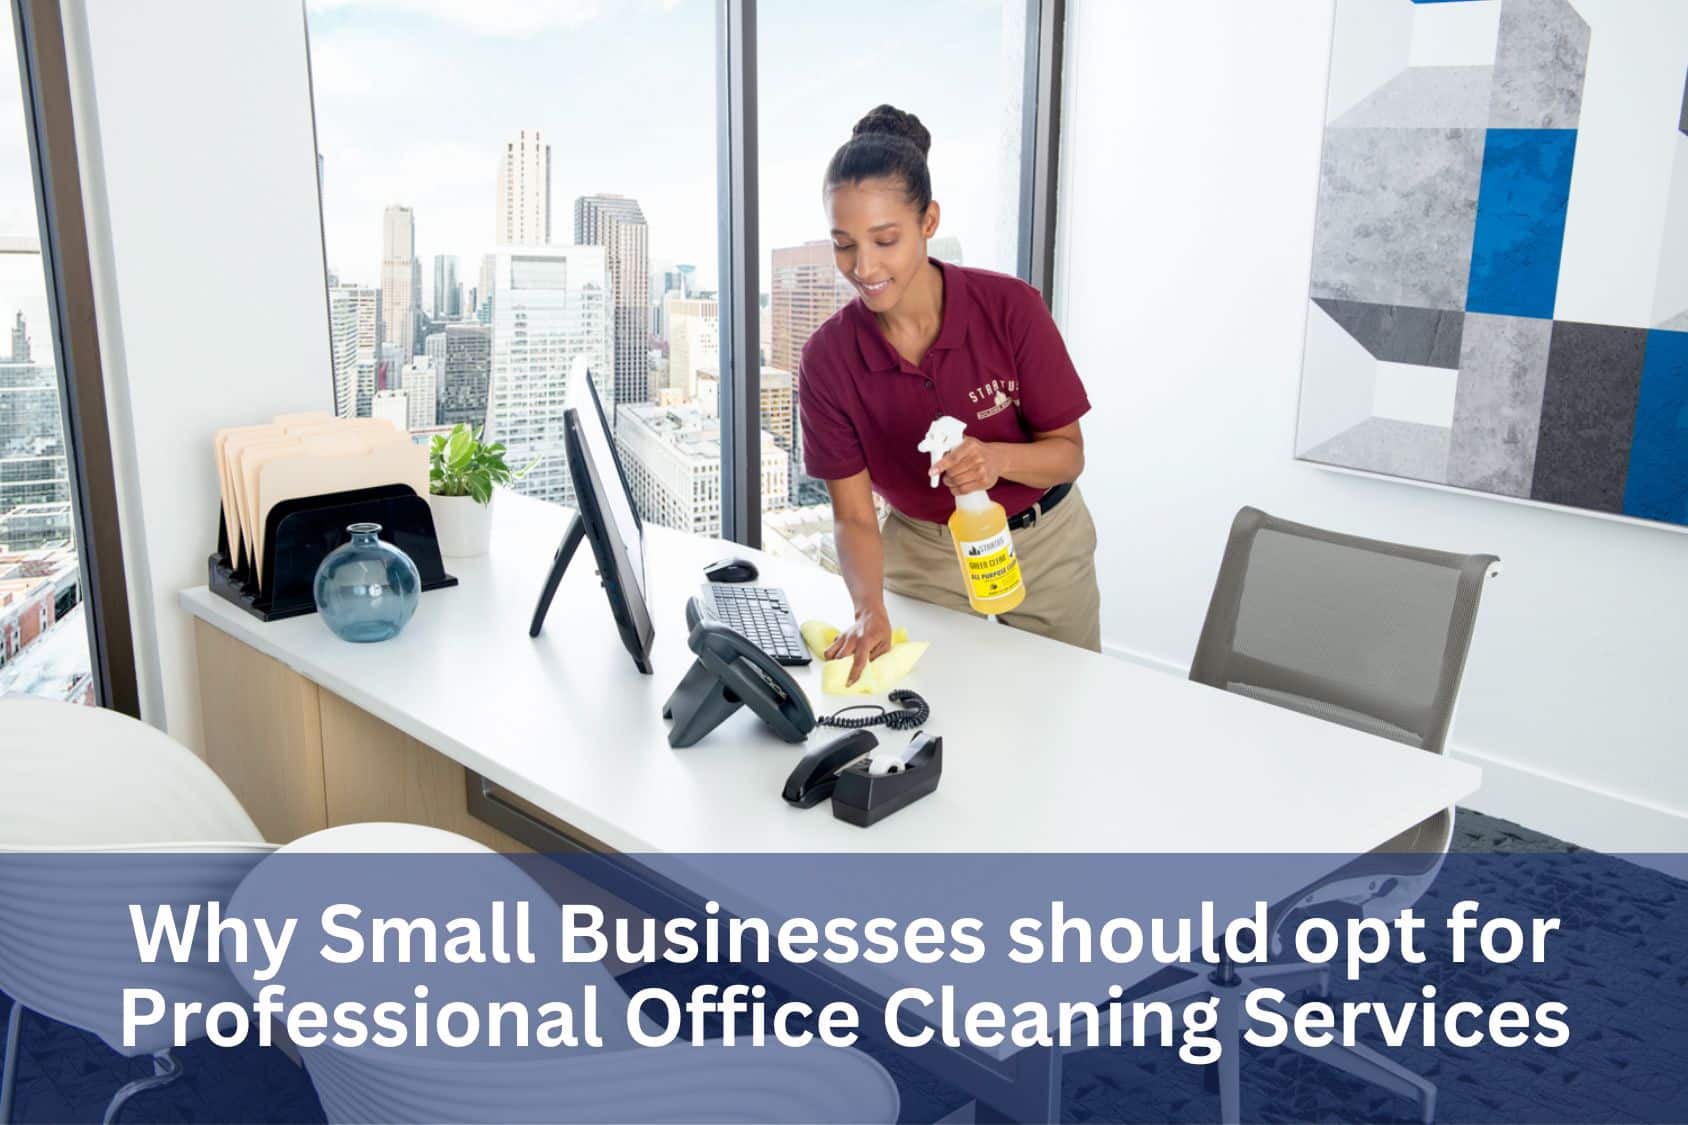 Why Small Businesses should opt for Professional Office Cleaning Services